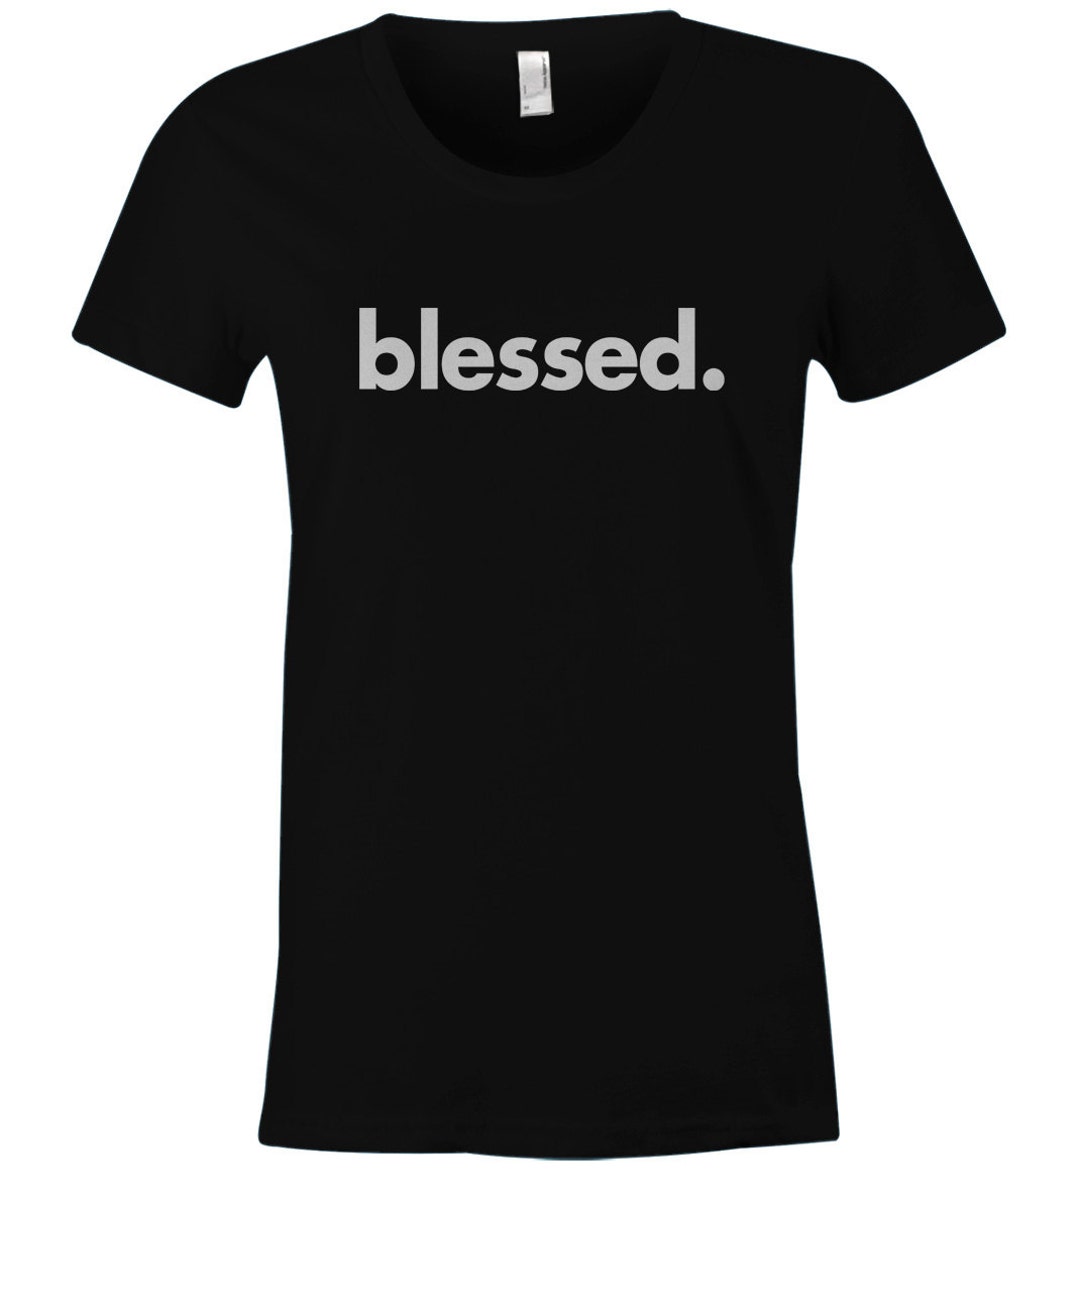 Truly Blessed T Shirt Inspirational Tee American Apparel - Etsy